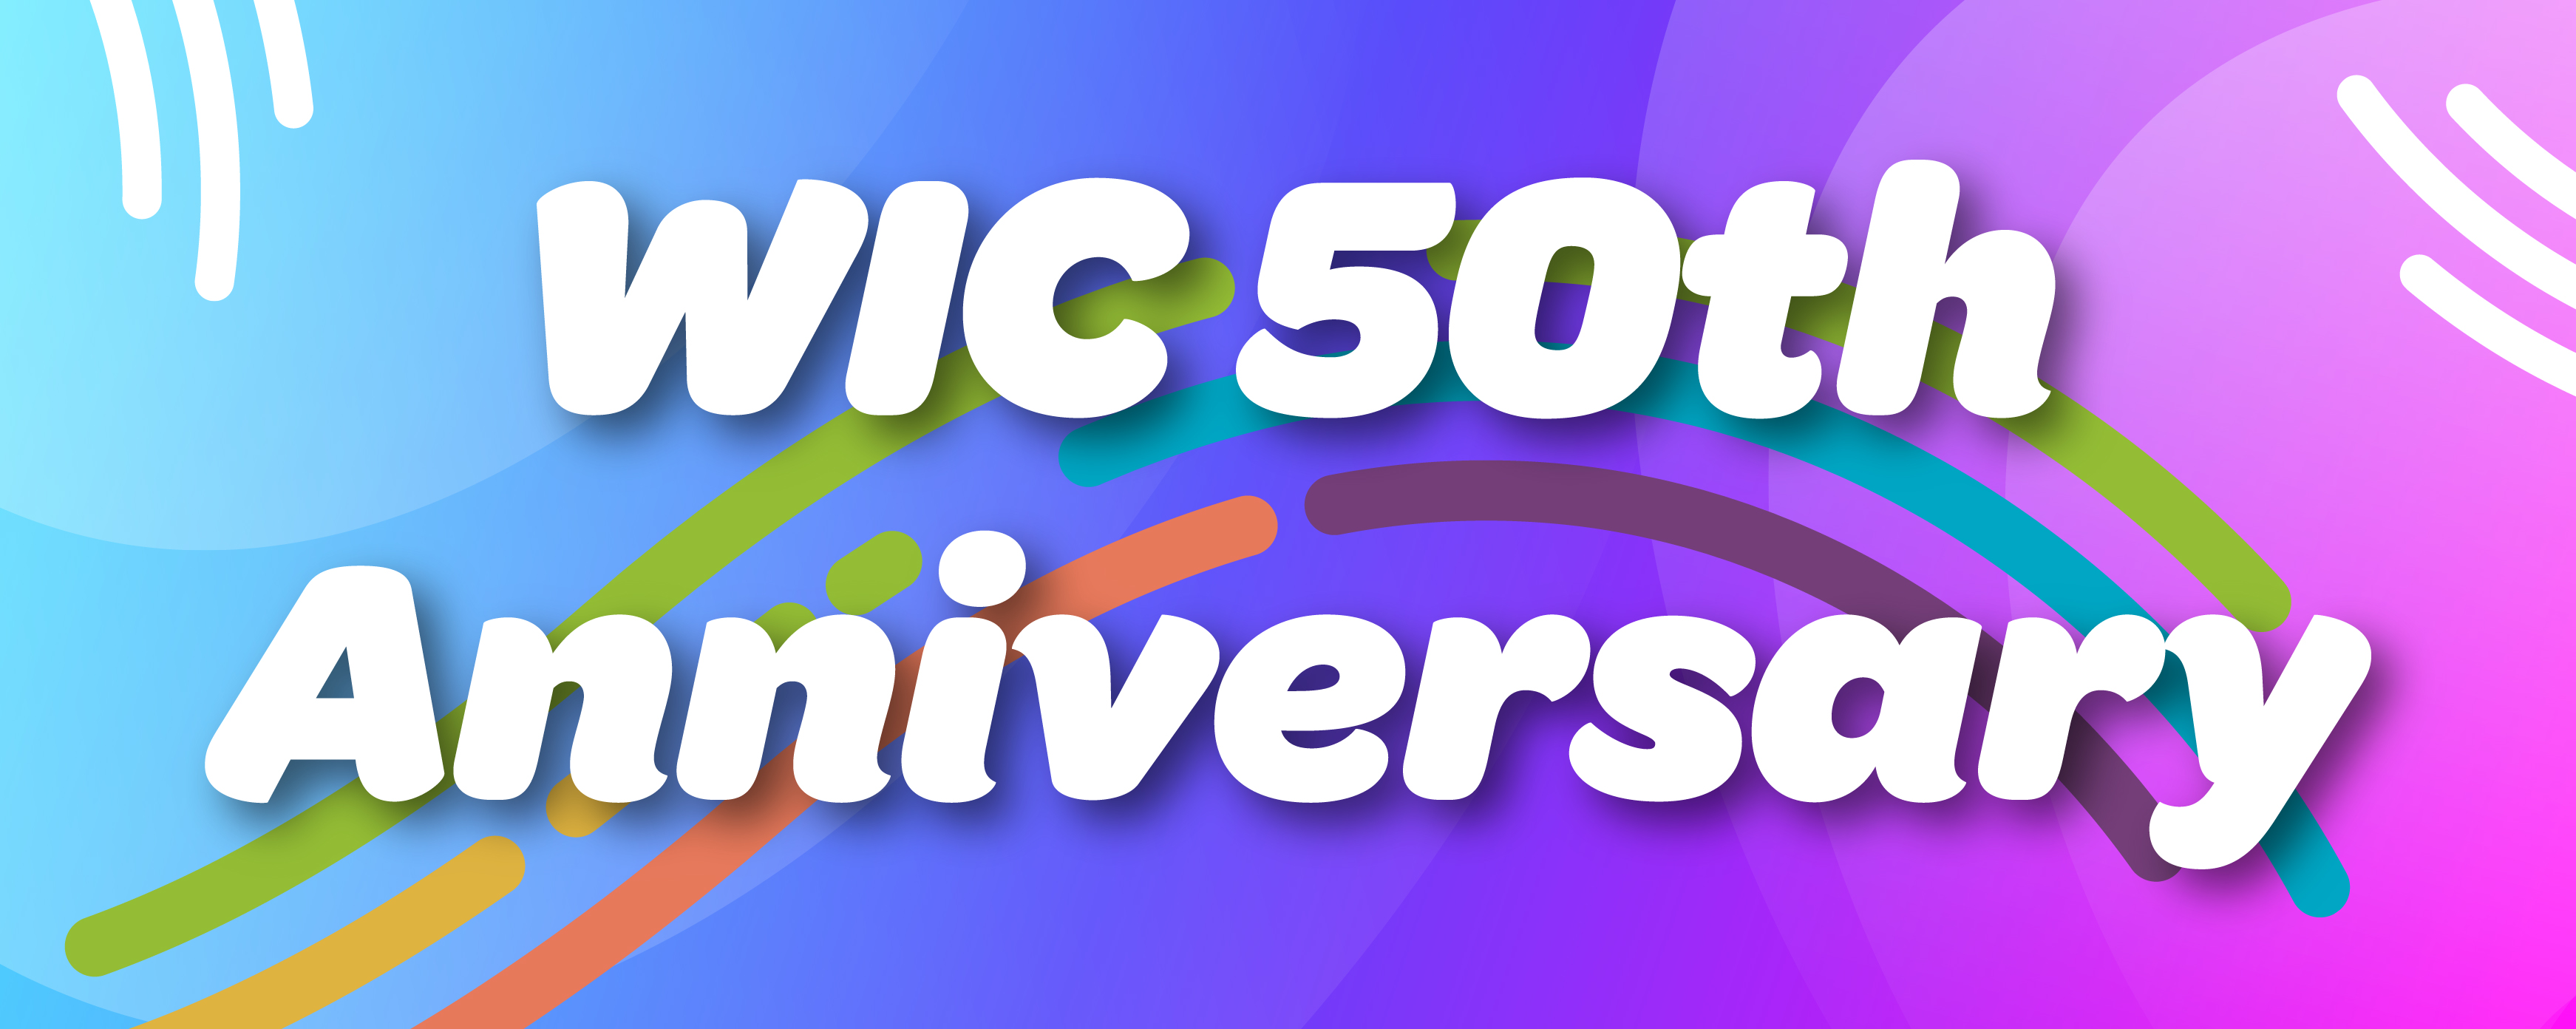 WIC 50th Anniversary on blue and purple background